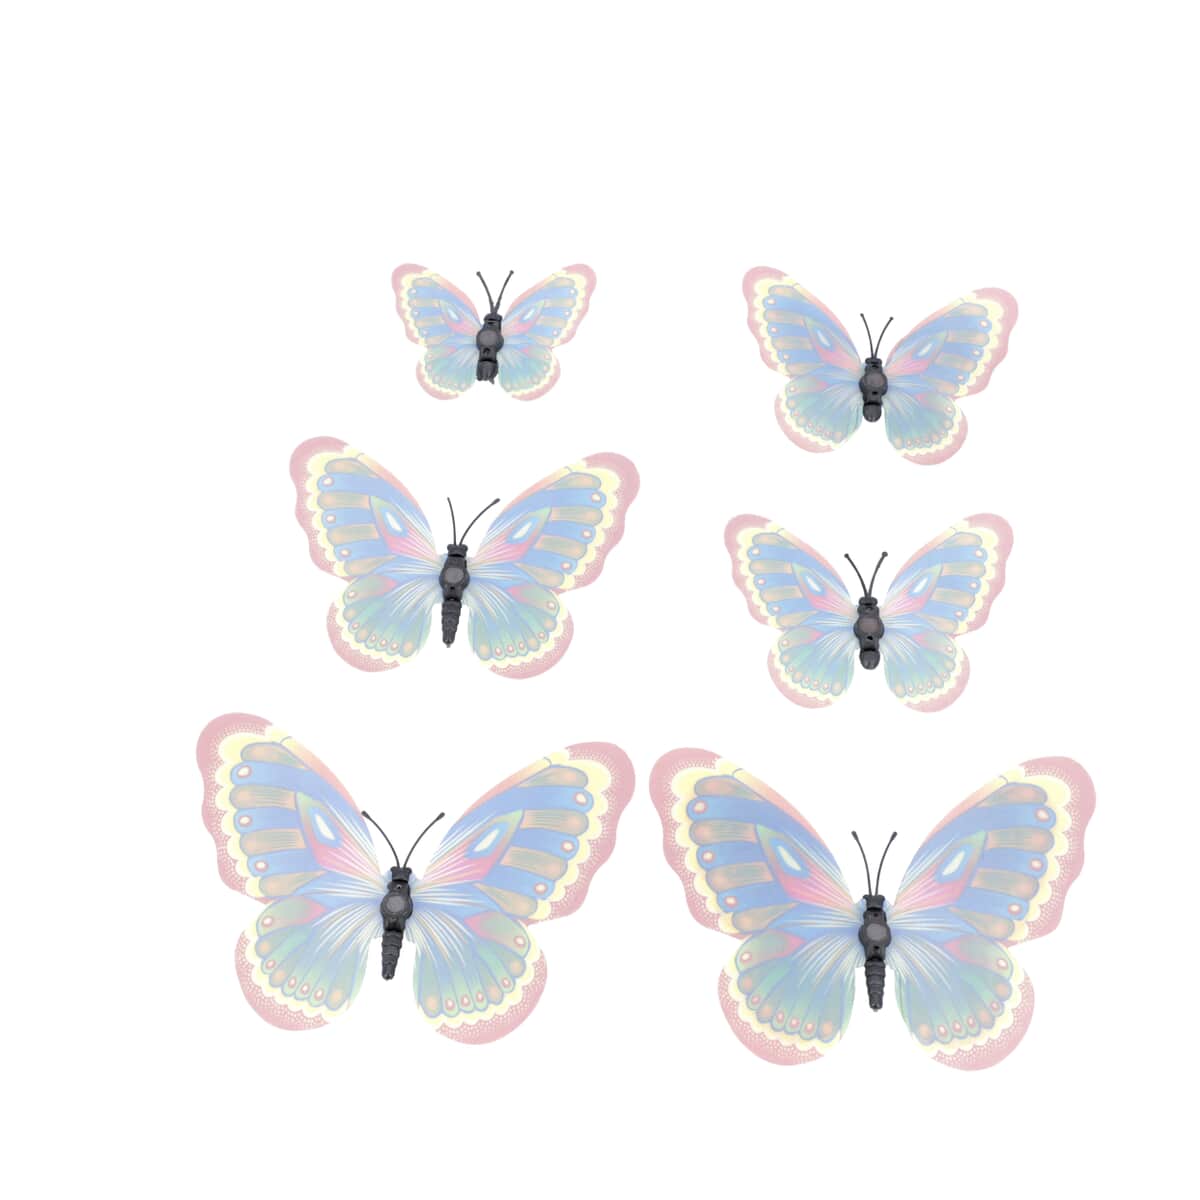 Set of 42 Pcs Plastic Decorative Multicolored Plastic Magnetic 3D Butterfly For Home Decor image number 6